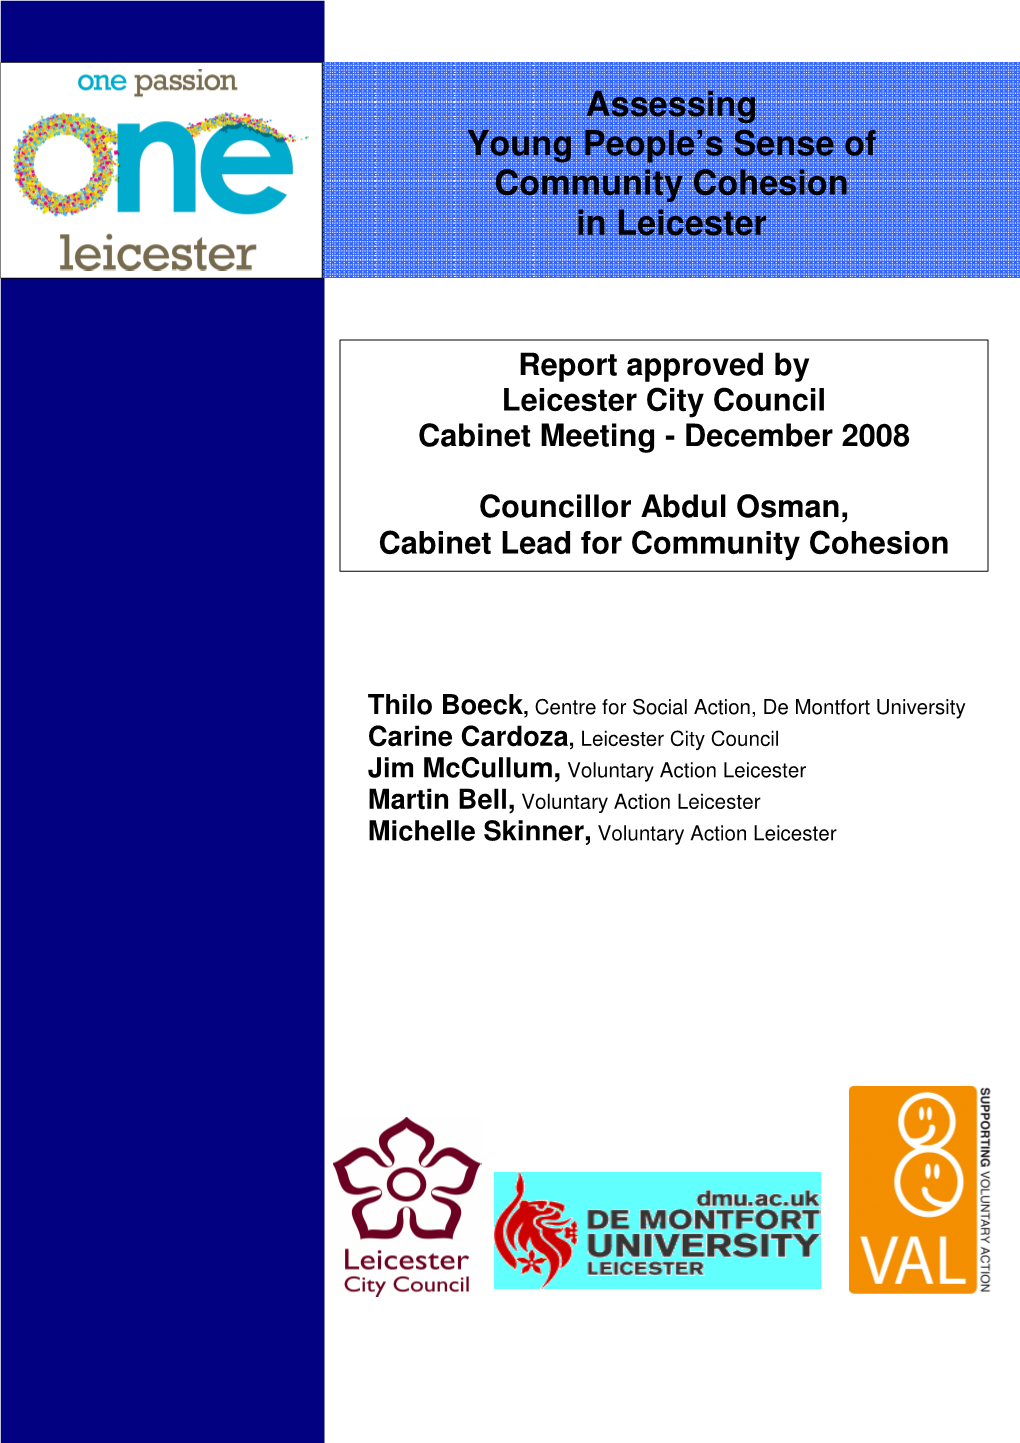 Assessing Young People's Sense of Community Cohesion in Leicester